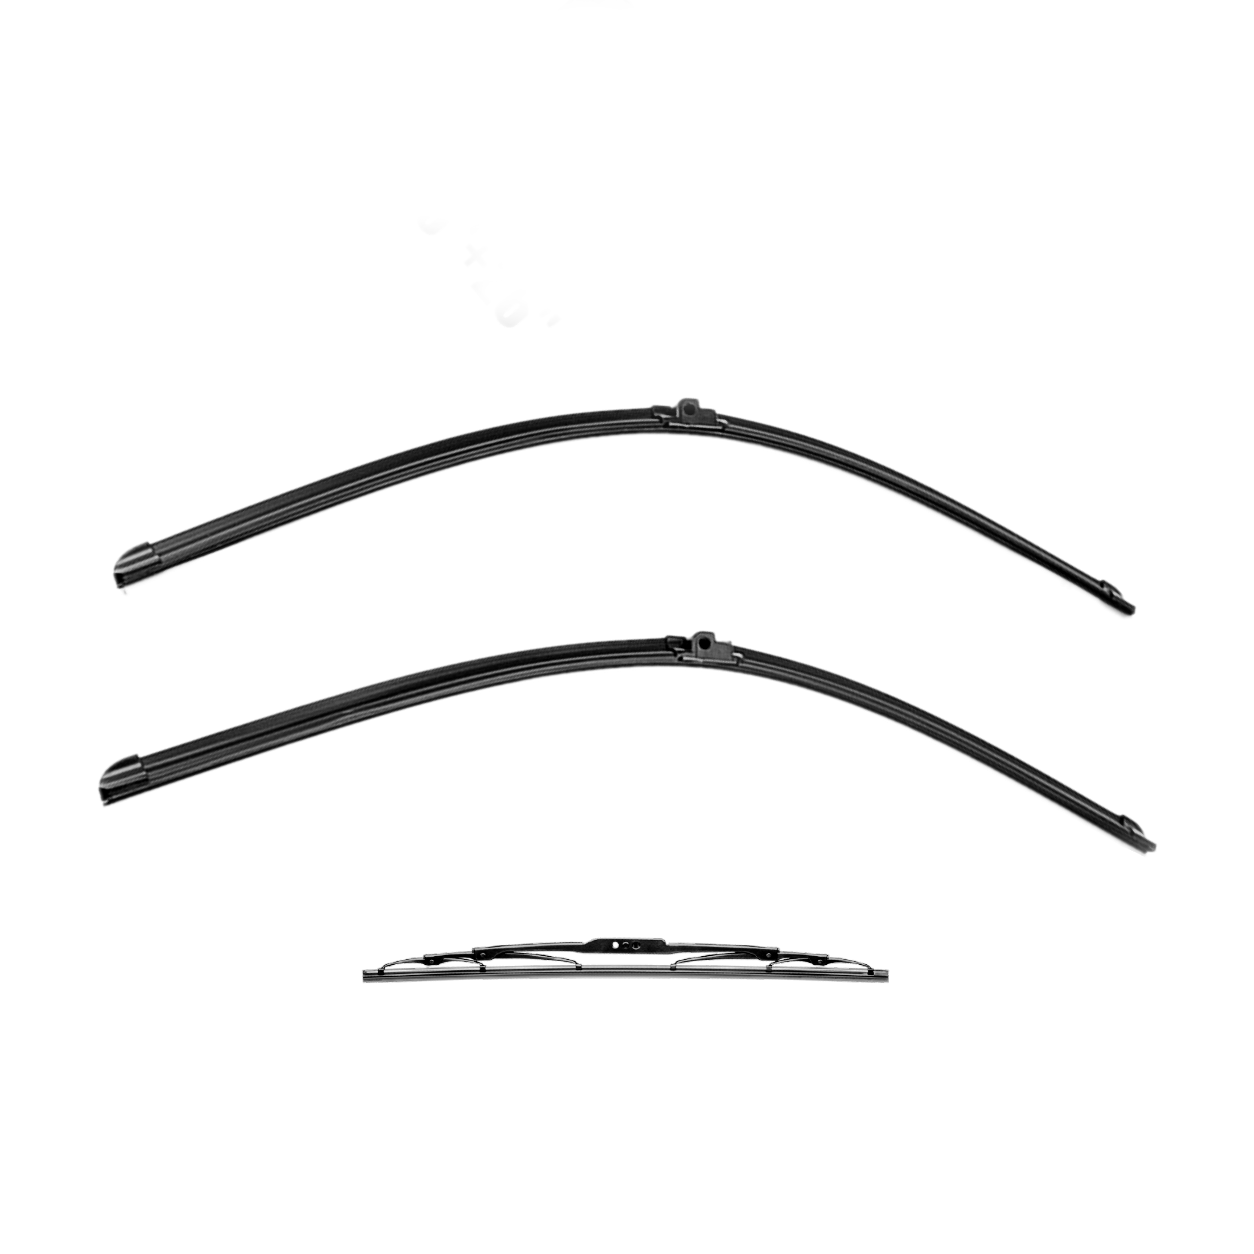 Mercedes Benz C-Class 2009-2012 (S204 Facelift I) Wagon Replacement Wiper Blades